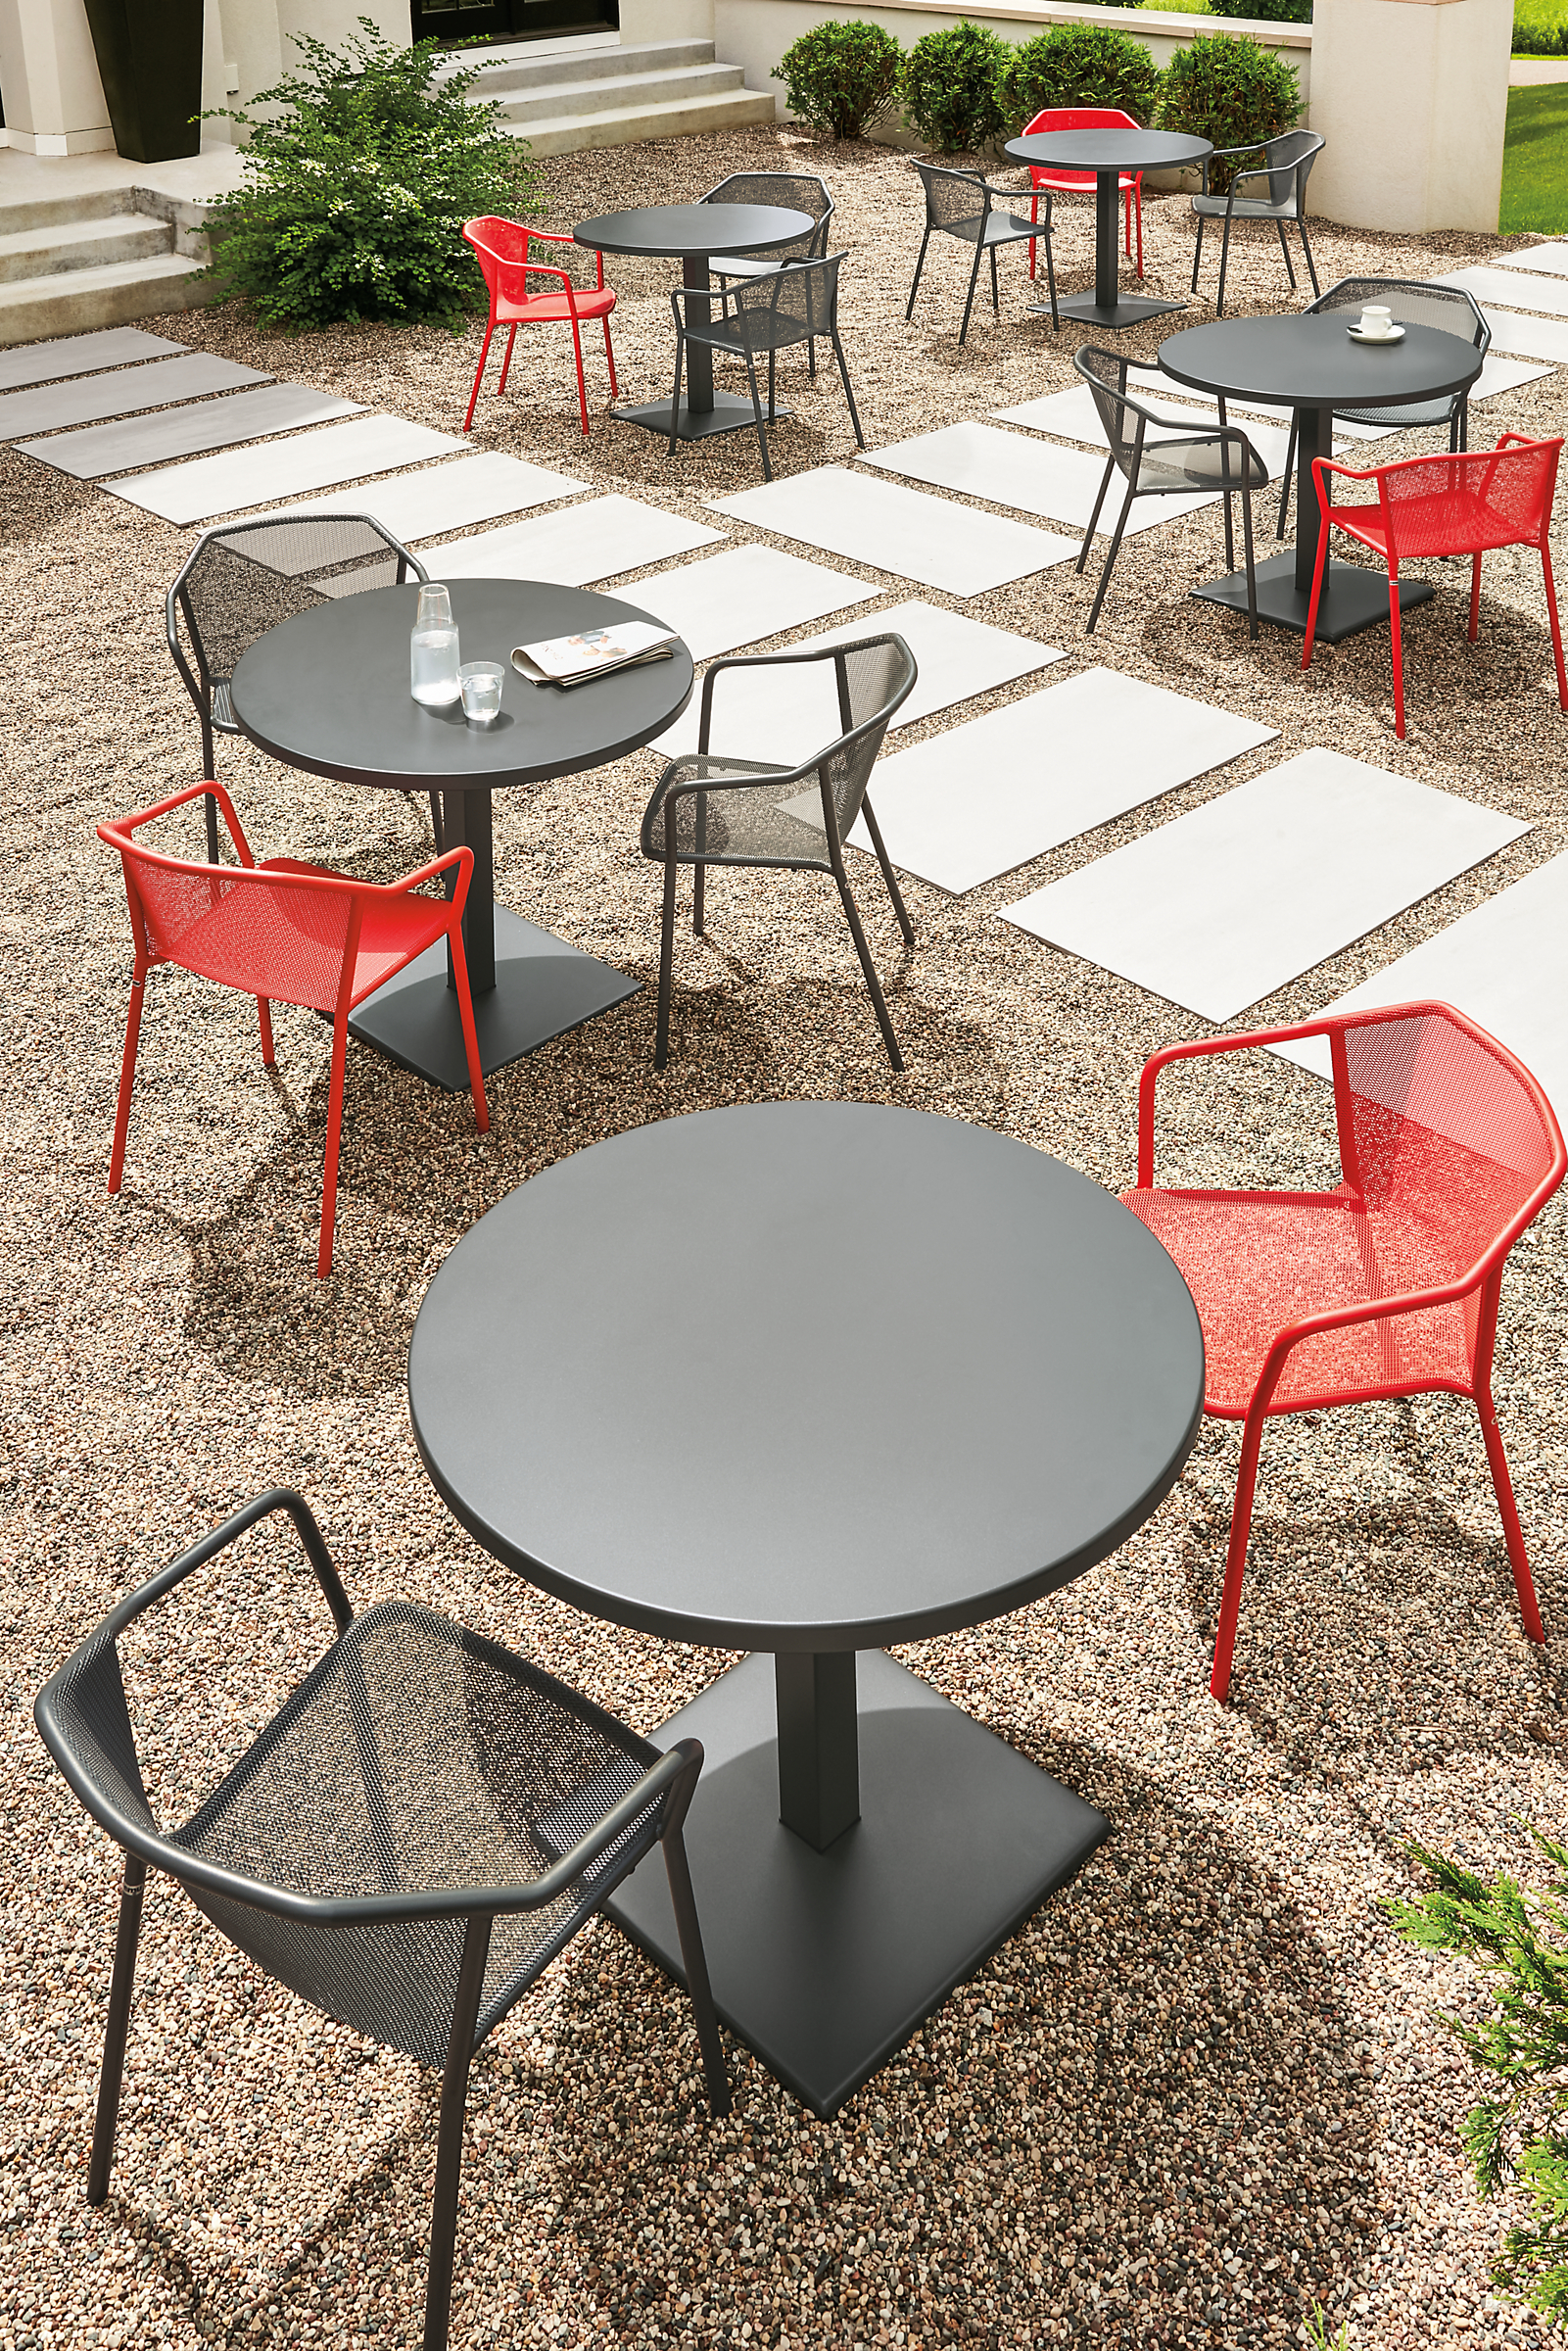 Detail of Theo chairs and Maris round tables on patio.